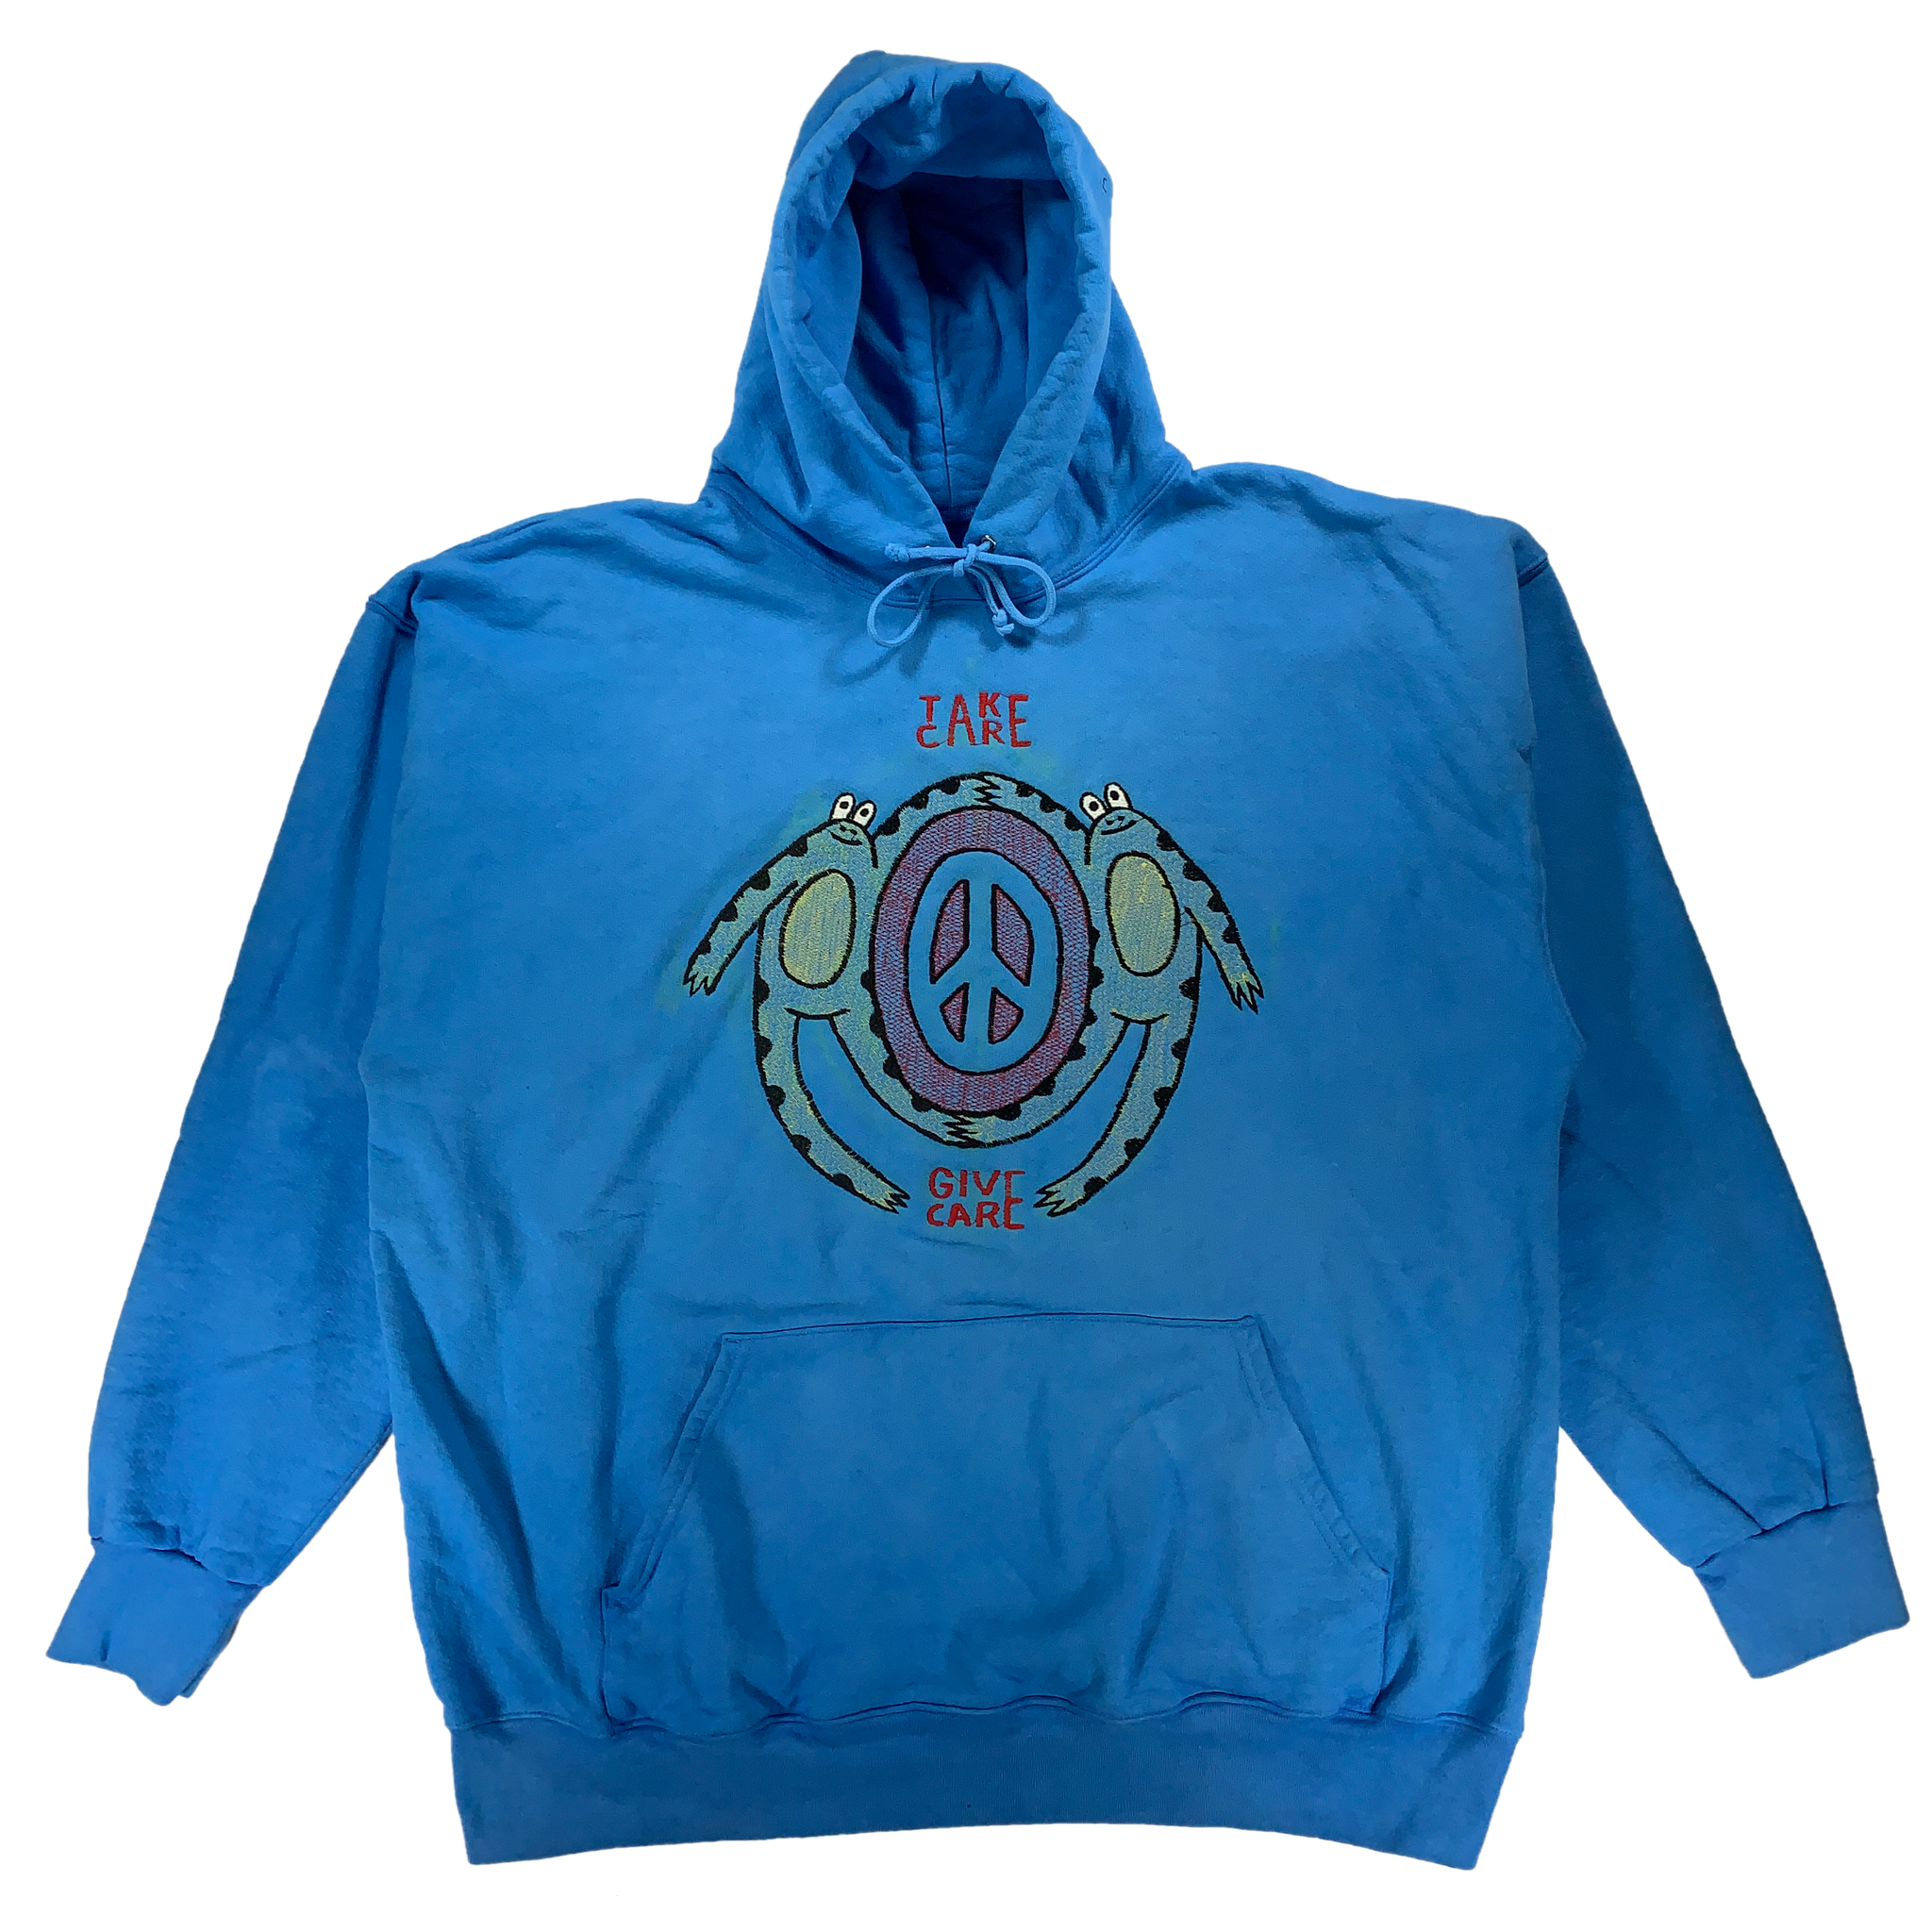 Embroidered and Dyed Hoodie - 3XL